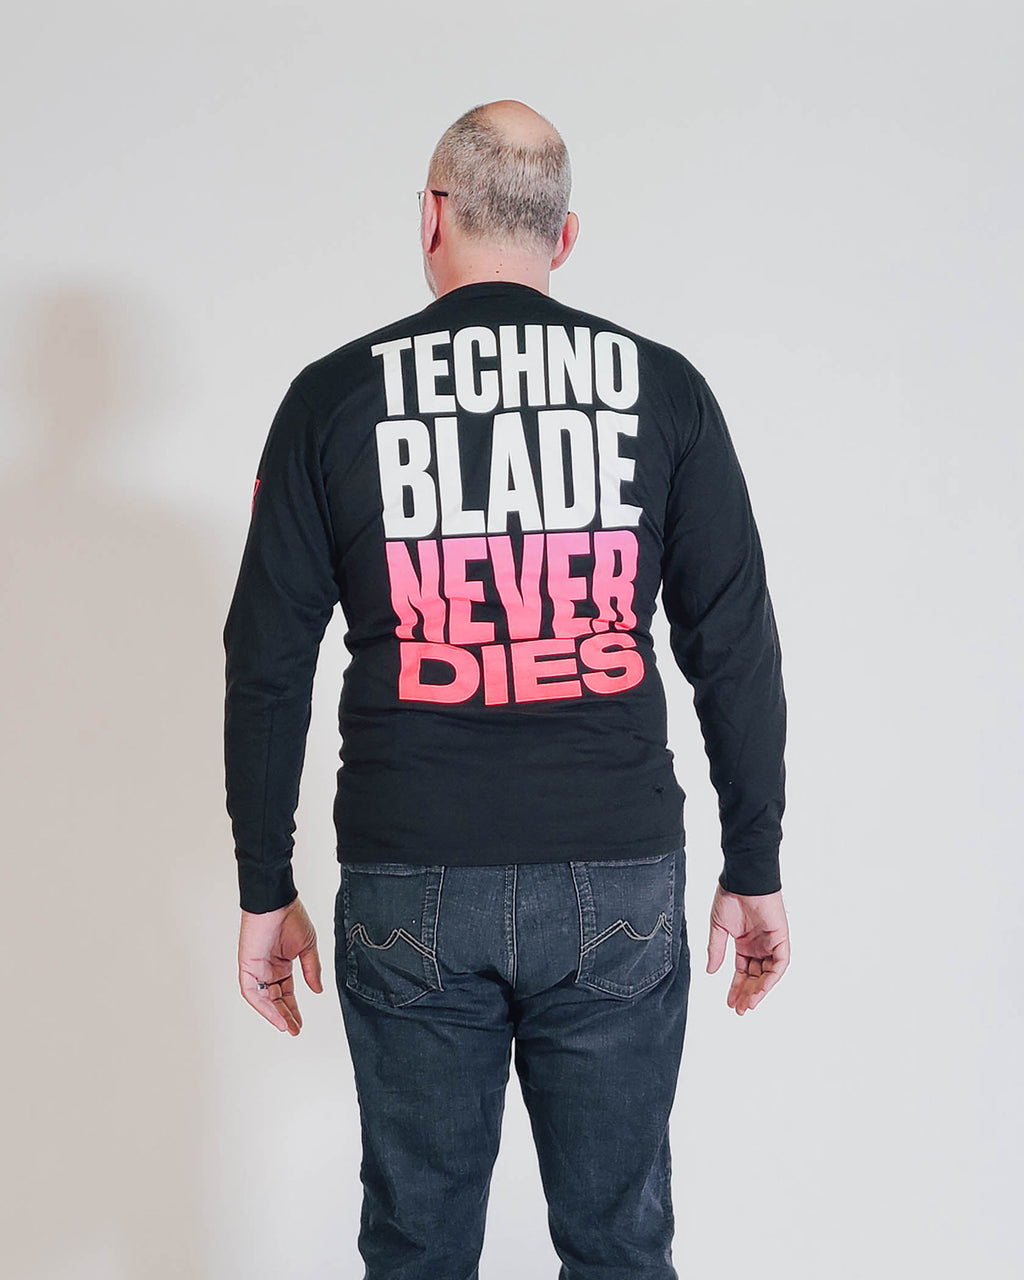 Technoblade Never Dies 1999-2022 Shirt, hoodie, sweater, longsleeve and  V-neck T-shirt